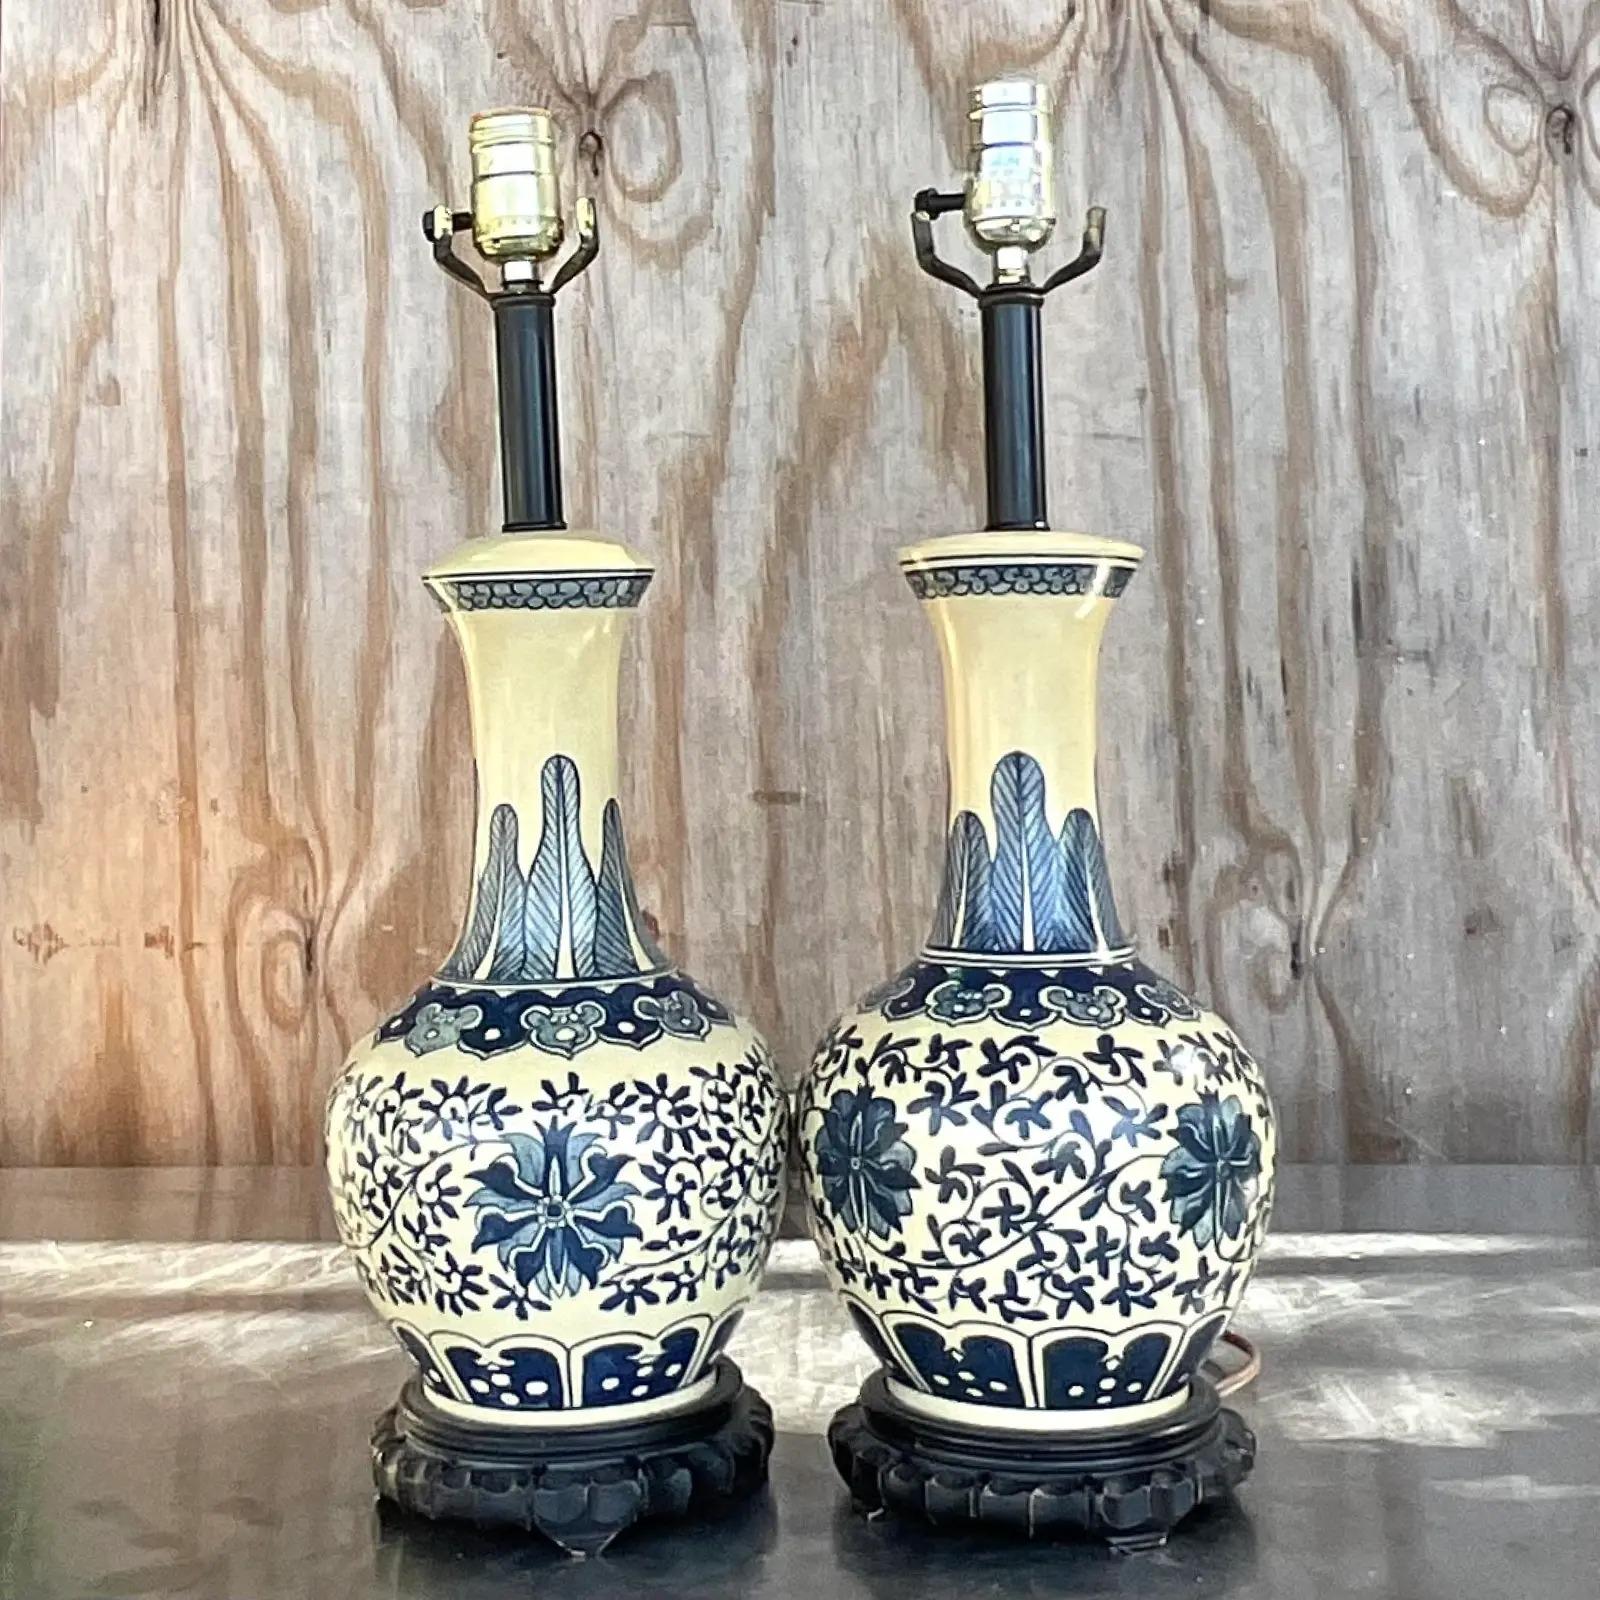 North American Vintage Boho Chic Hand Painted Gourd Lamps - a Pair For Sale